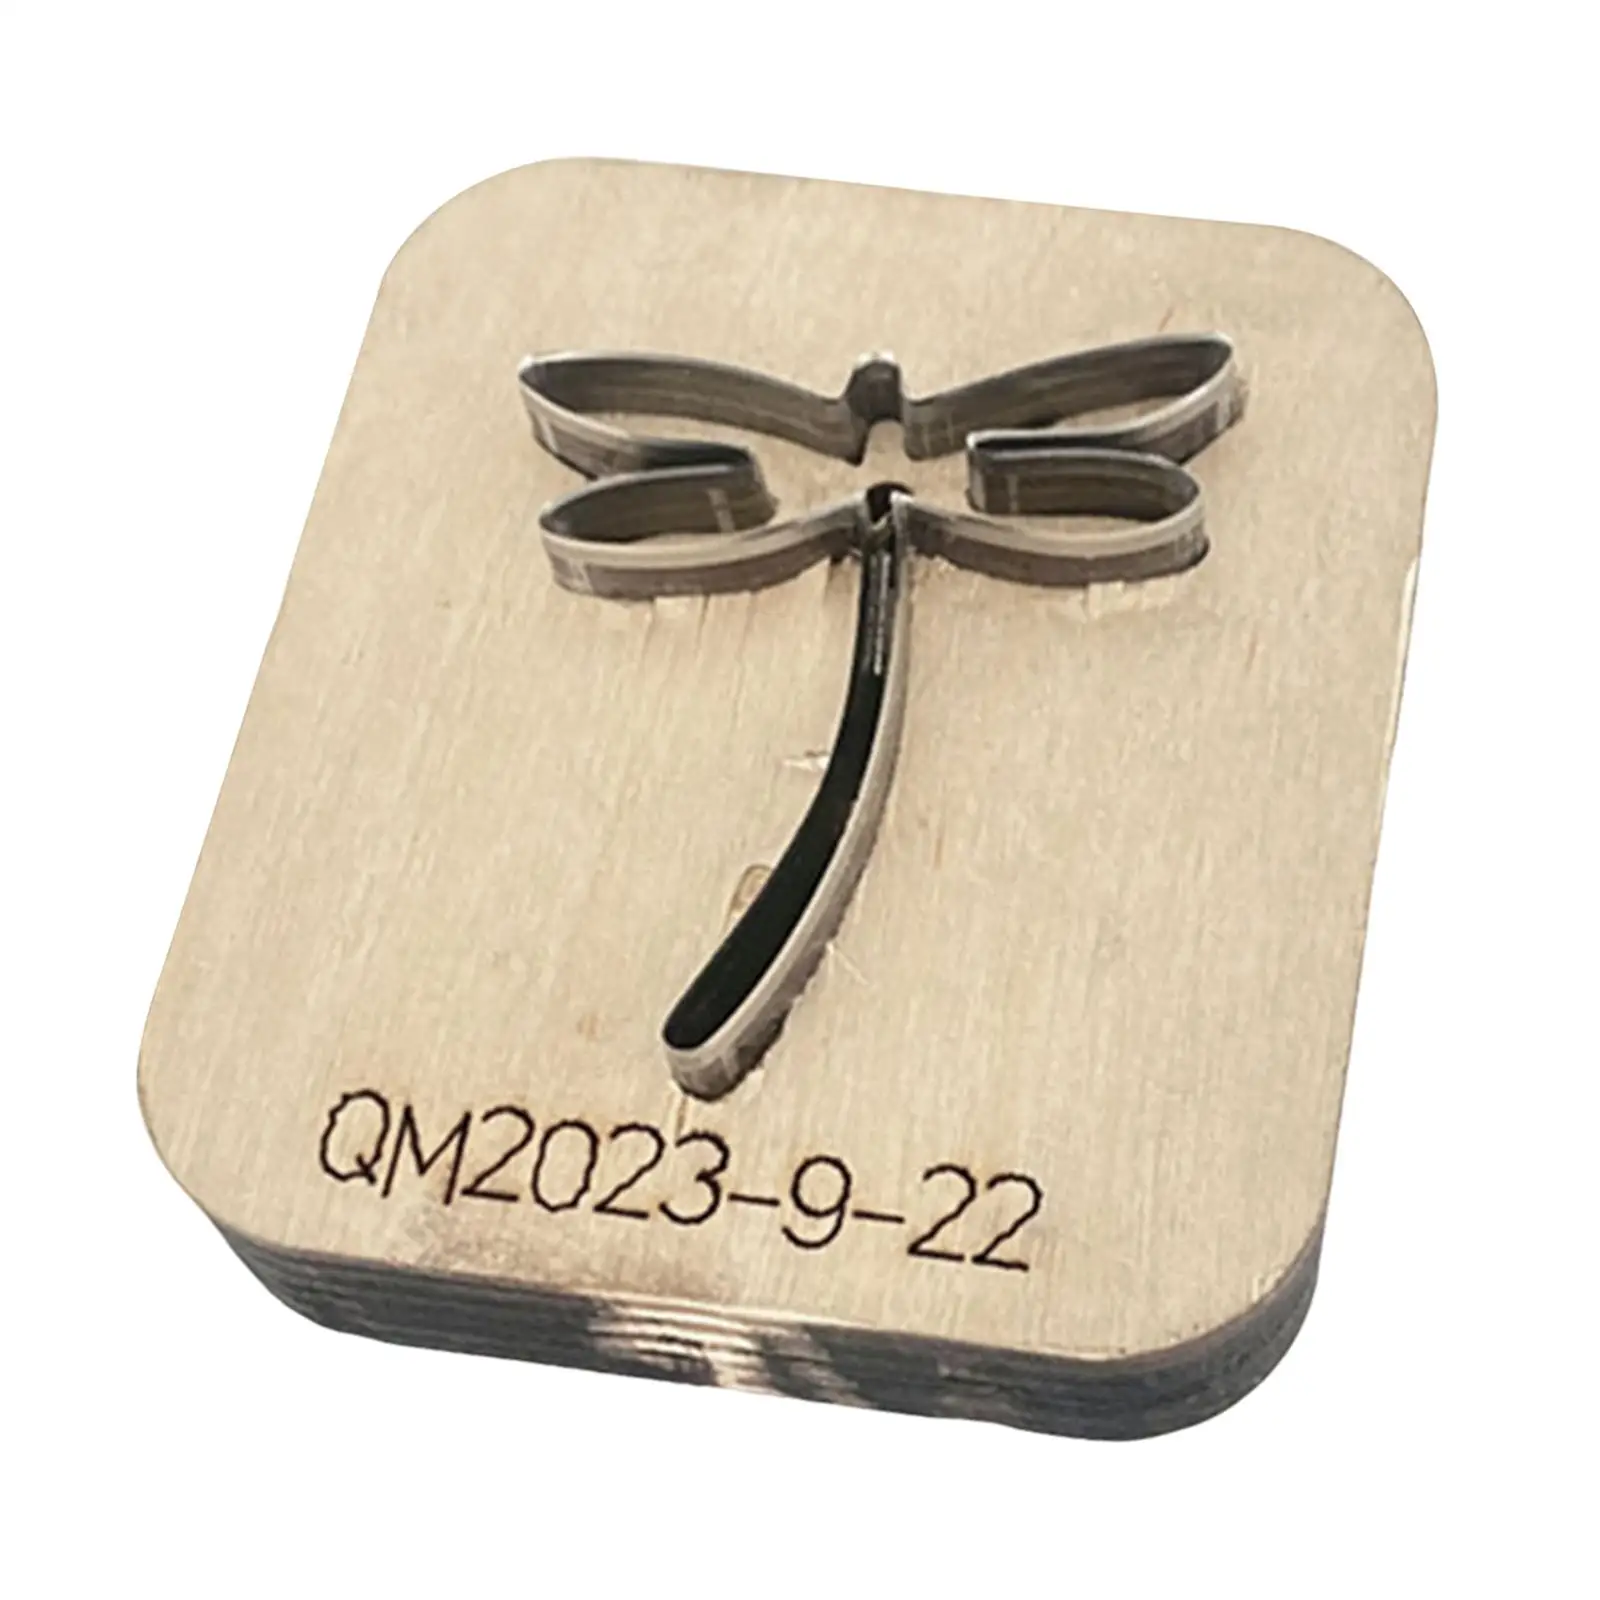 Leather Cut Mould Dragonfly Simple to Use Portable Home Stable Wooden Cutting Die Starter Practical Cutting Tool Scrapbook DIY